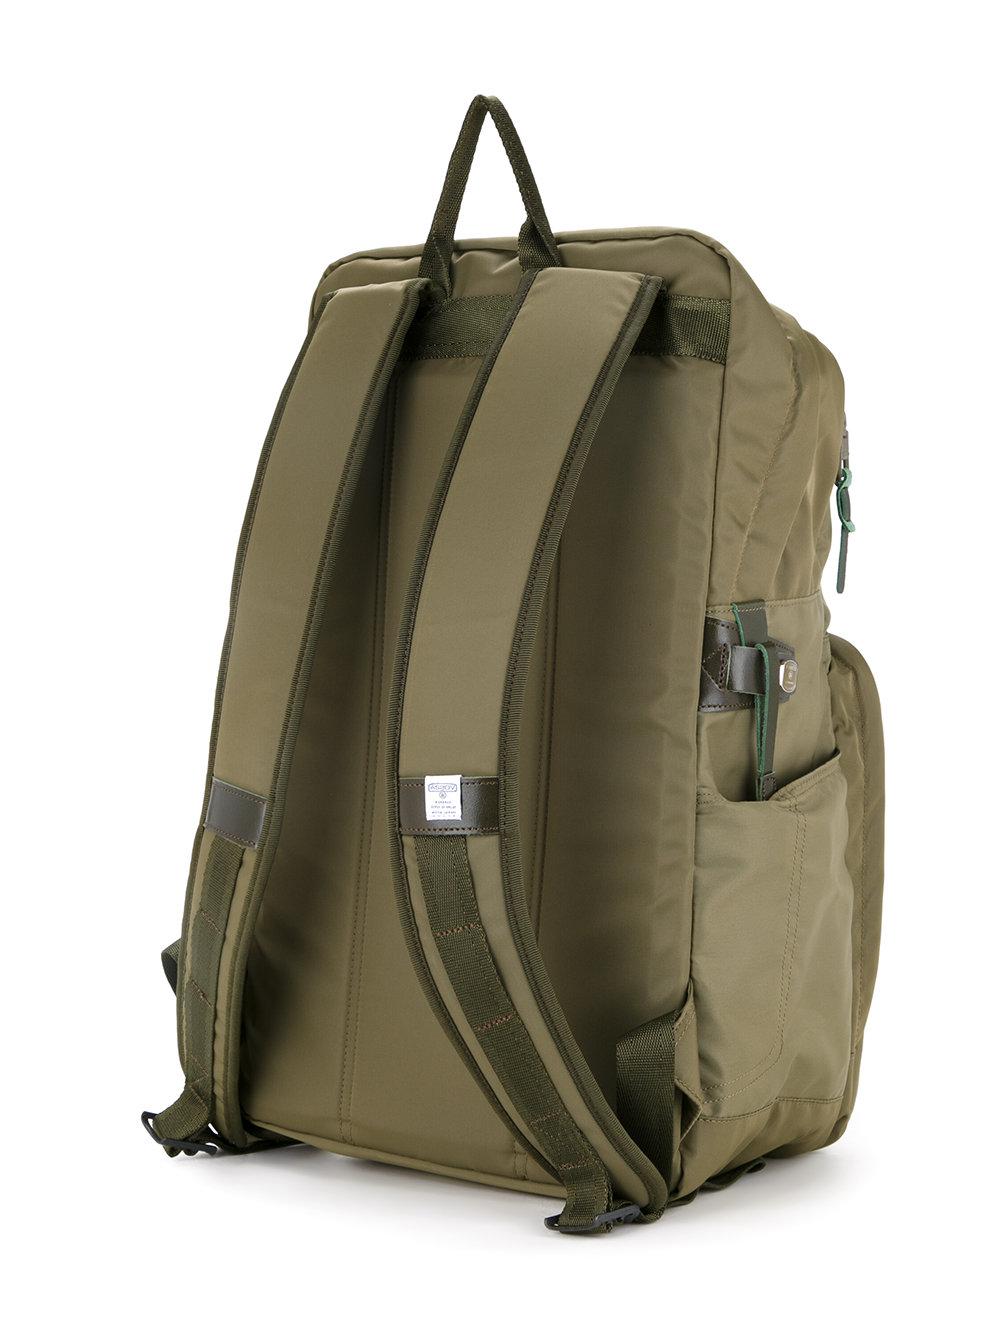 Lyst - As2Ov Zipped Backpack in Green for Men